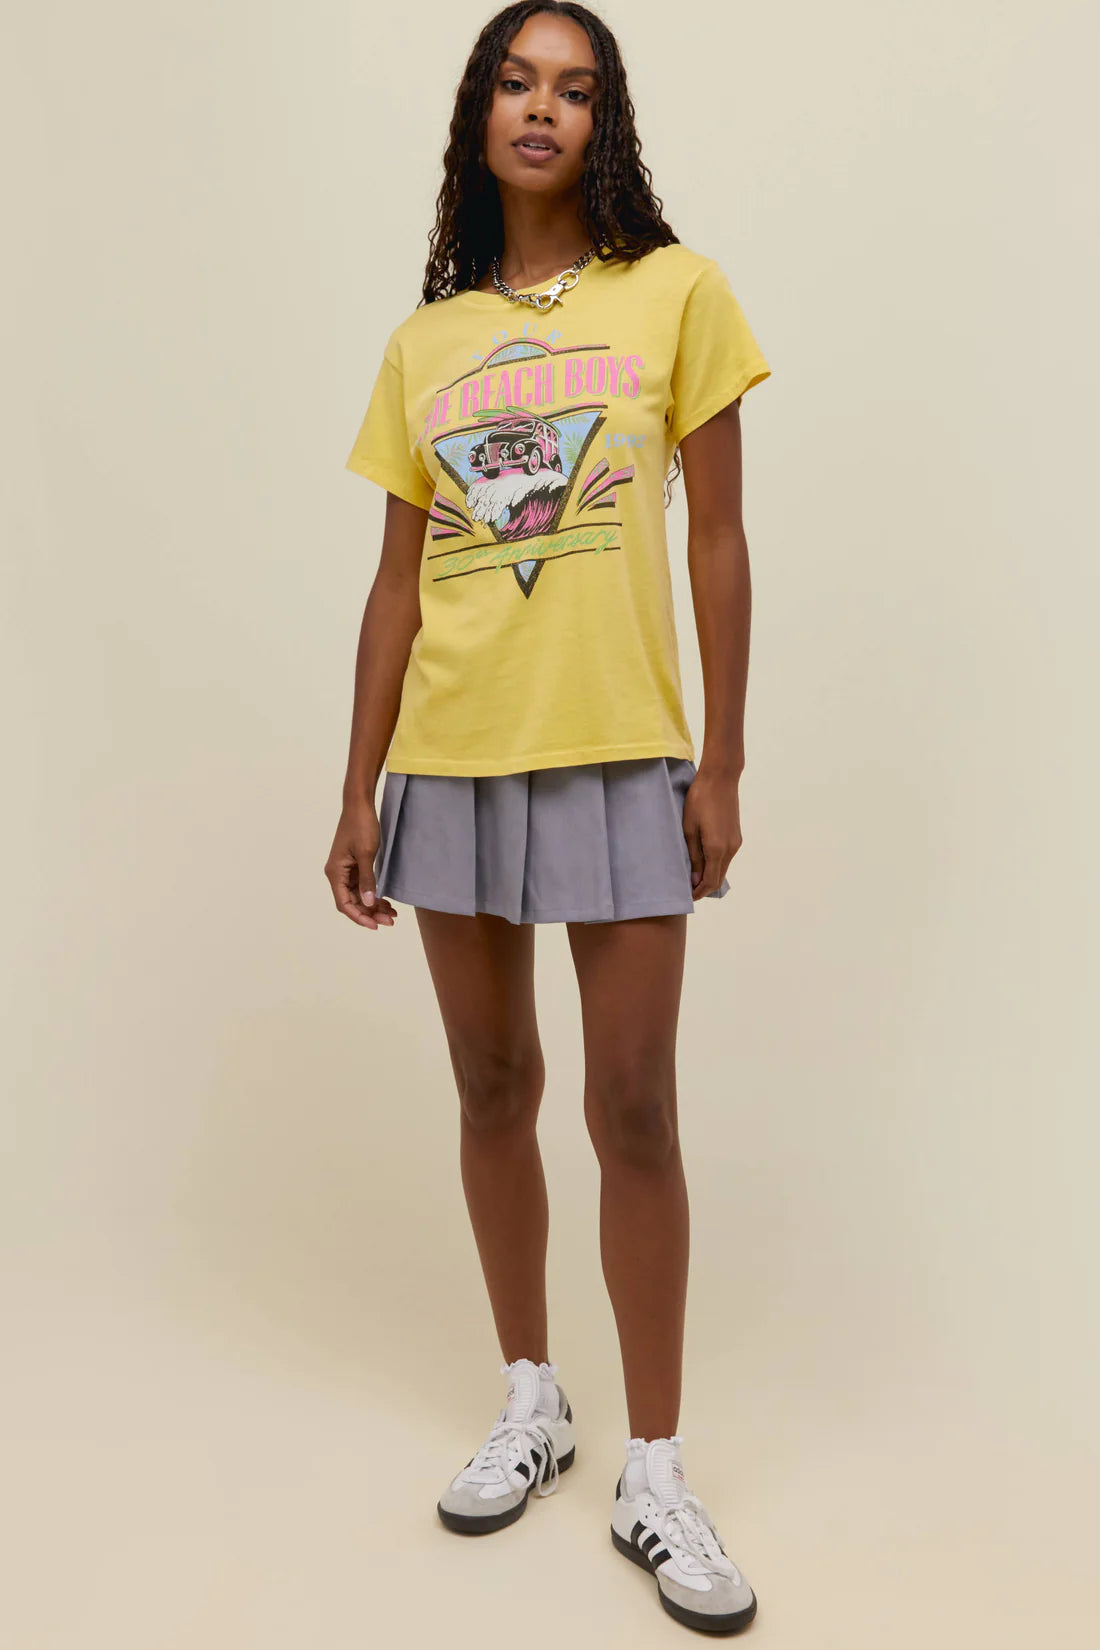 daydreamer the beach boys 30th anniversary tour tee in yellow bloom-front model view